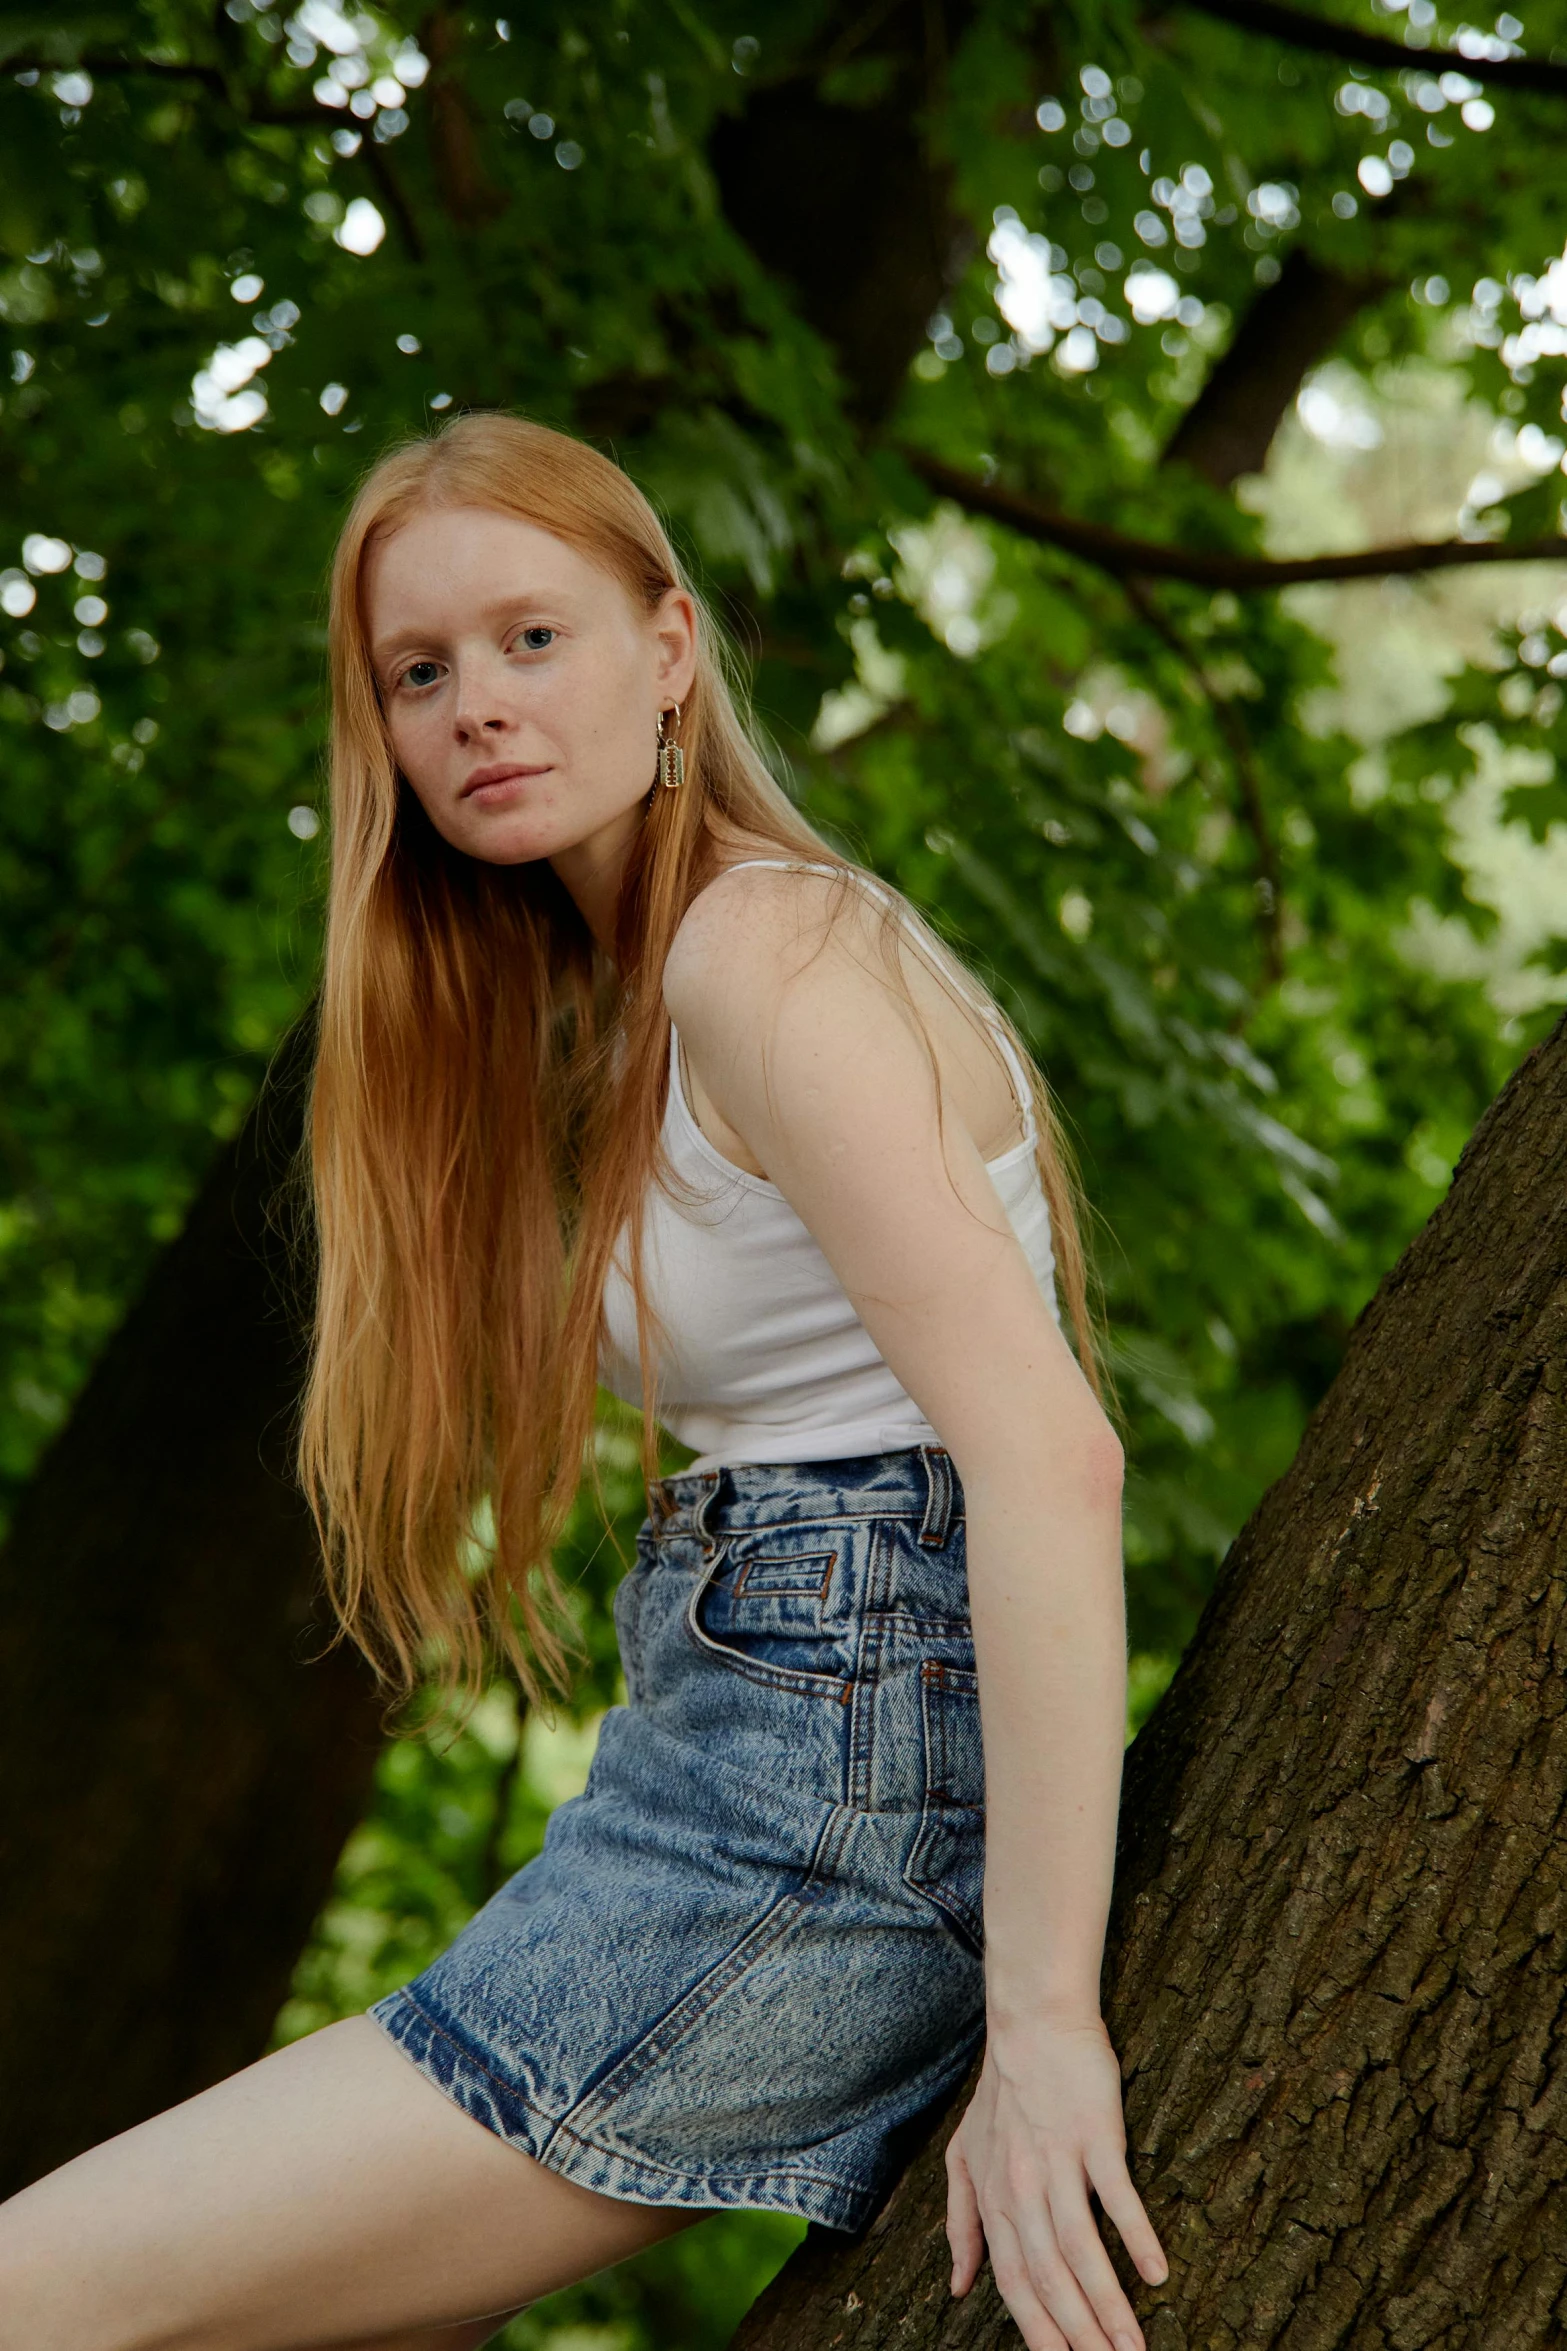 a young lady wearing denim skirts and top leaning on a tree trunk